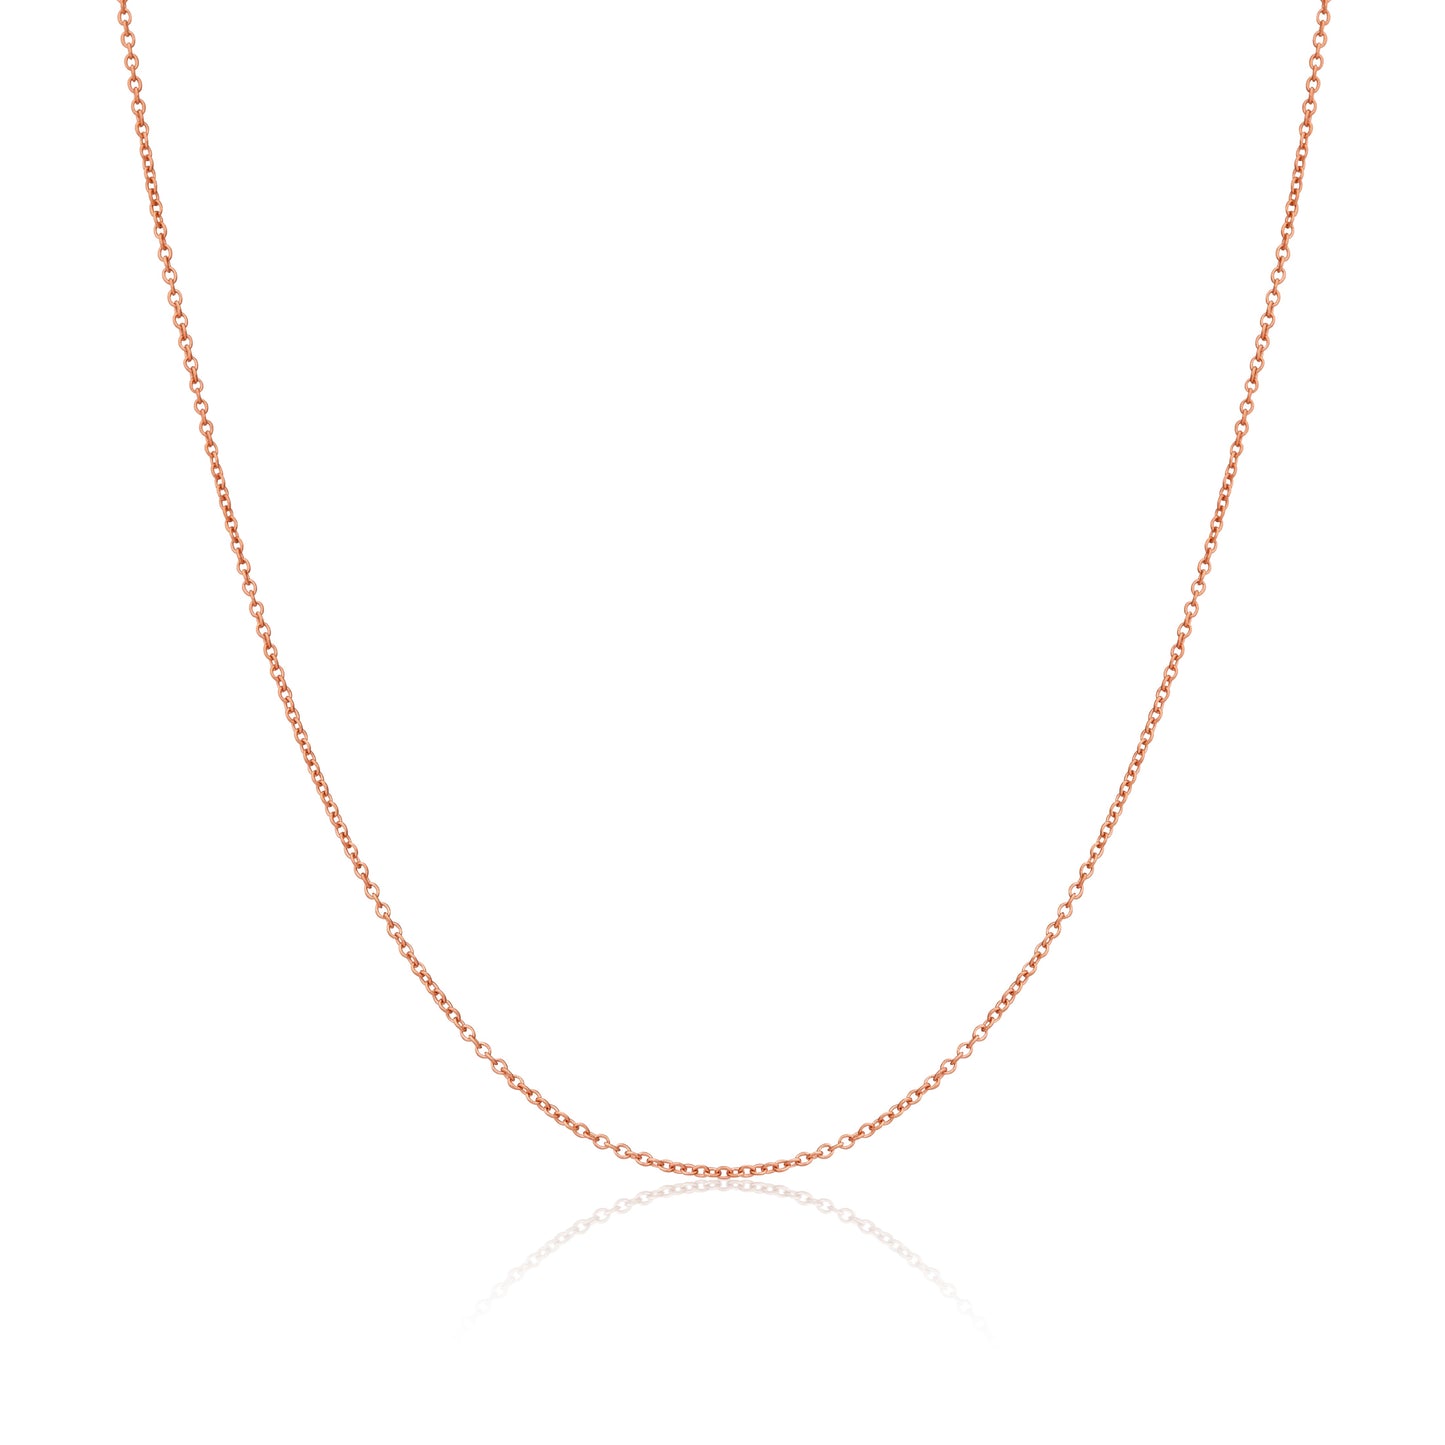 Rose Gold Plated Sterling Silver Trace Chain 16 - 32 Inches